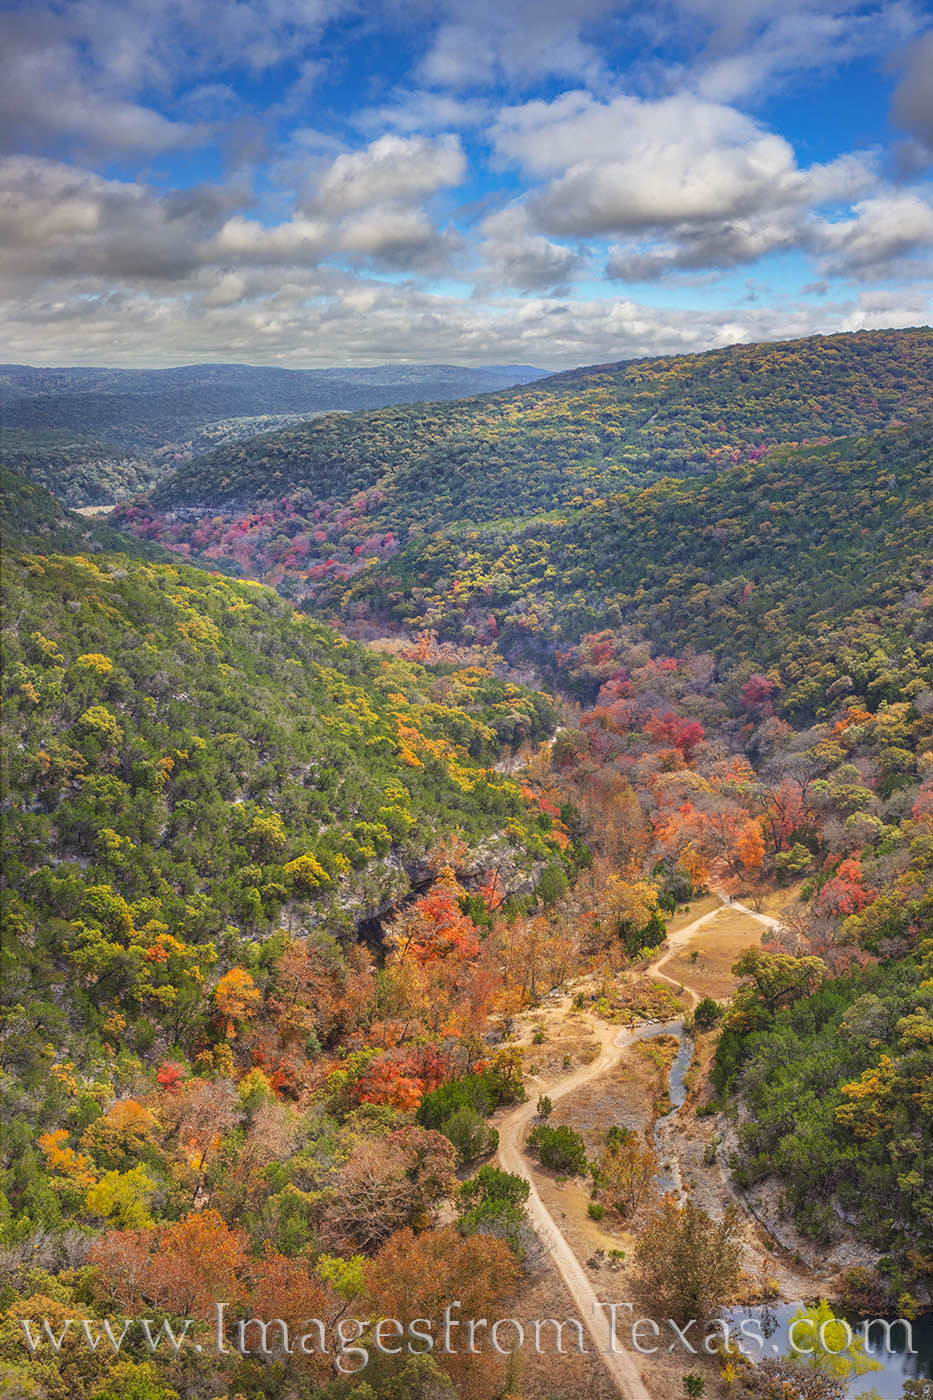 From high up on the edge of the East Trail in Lost Maples, this view shows the the colorful trees lining the lower portion of...